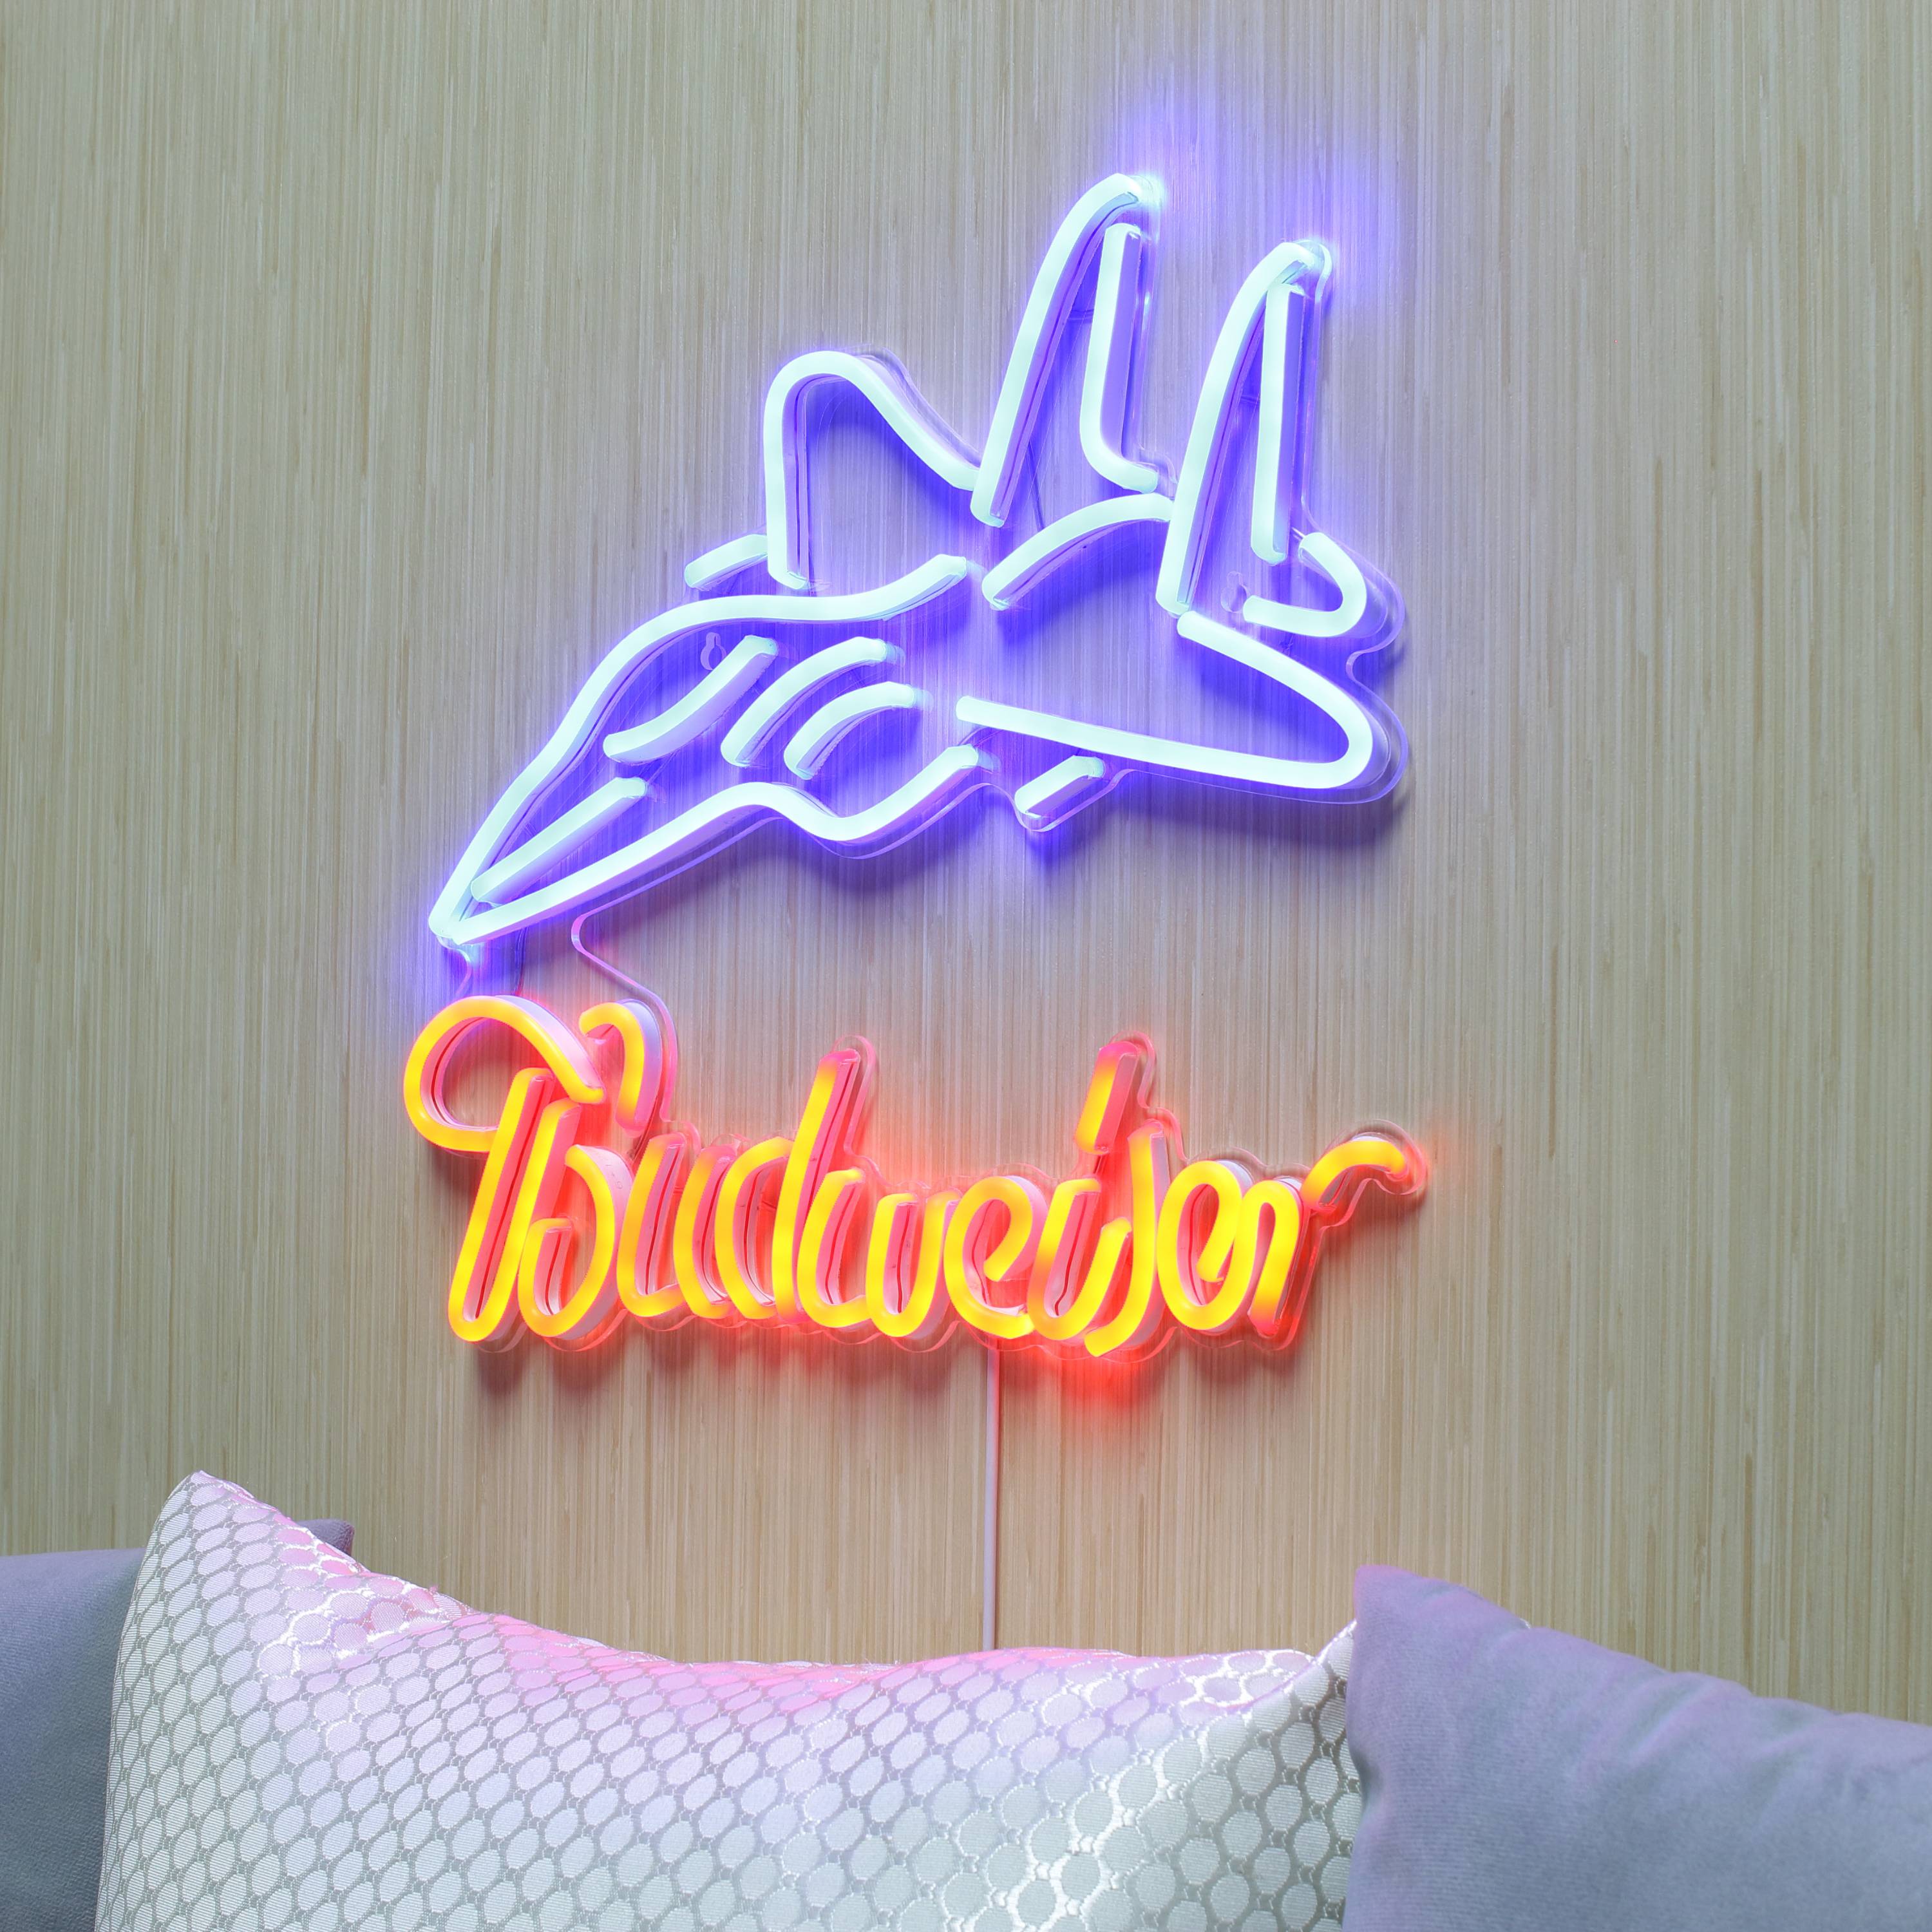 Budweiser with Jet Fighter Large Flex Neon LED Sign